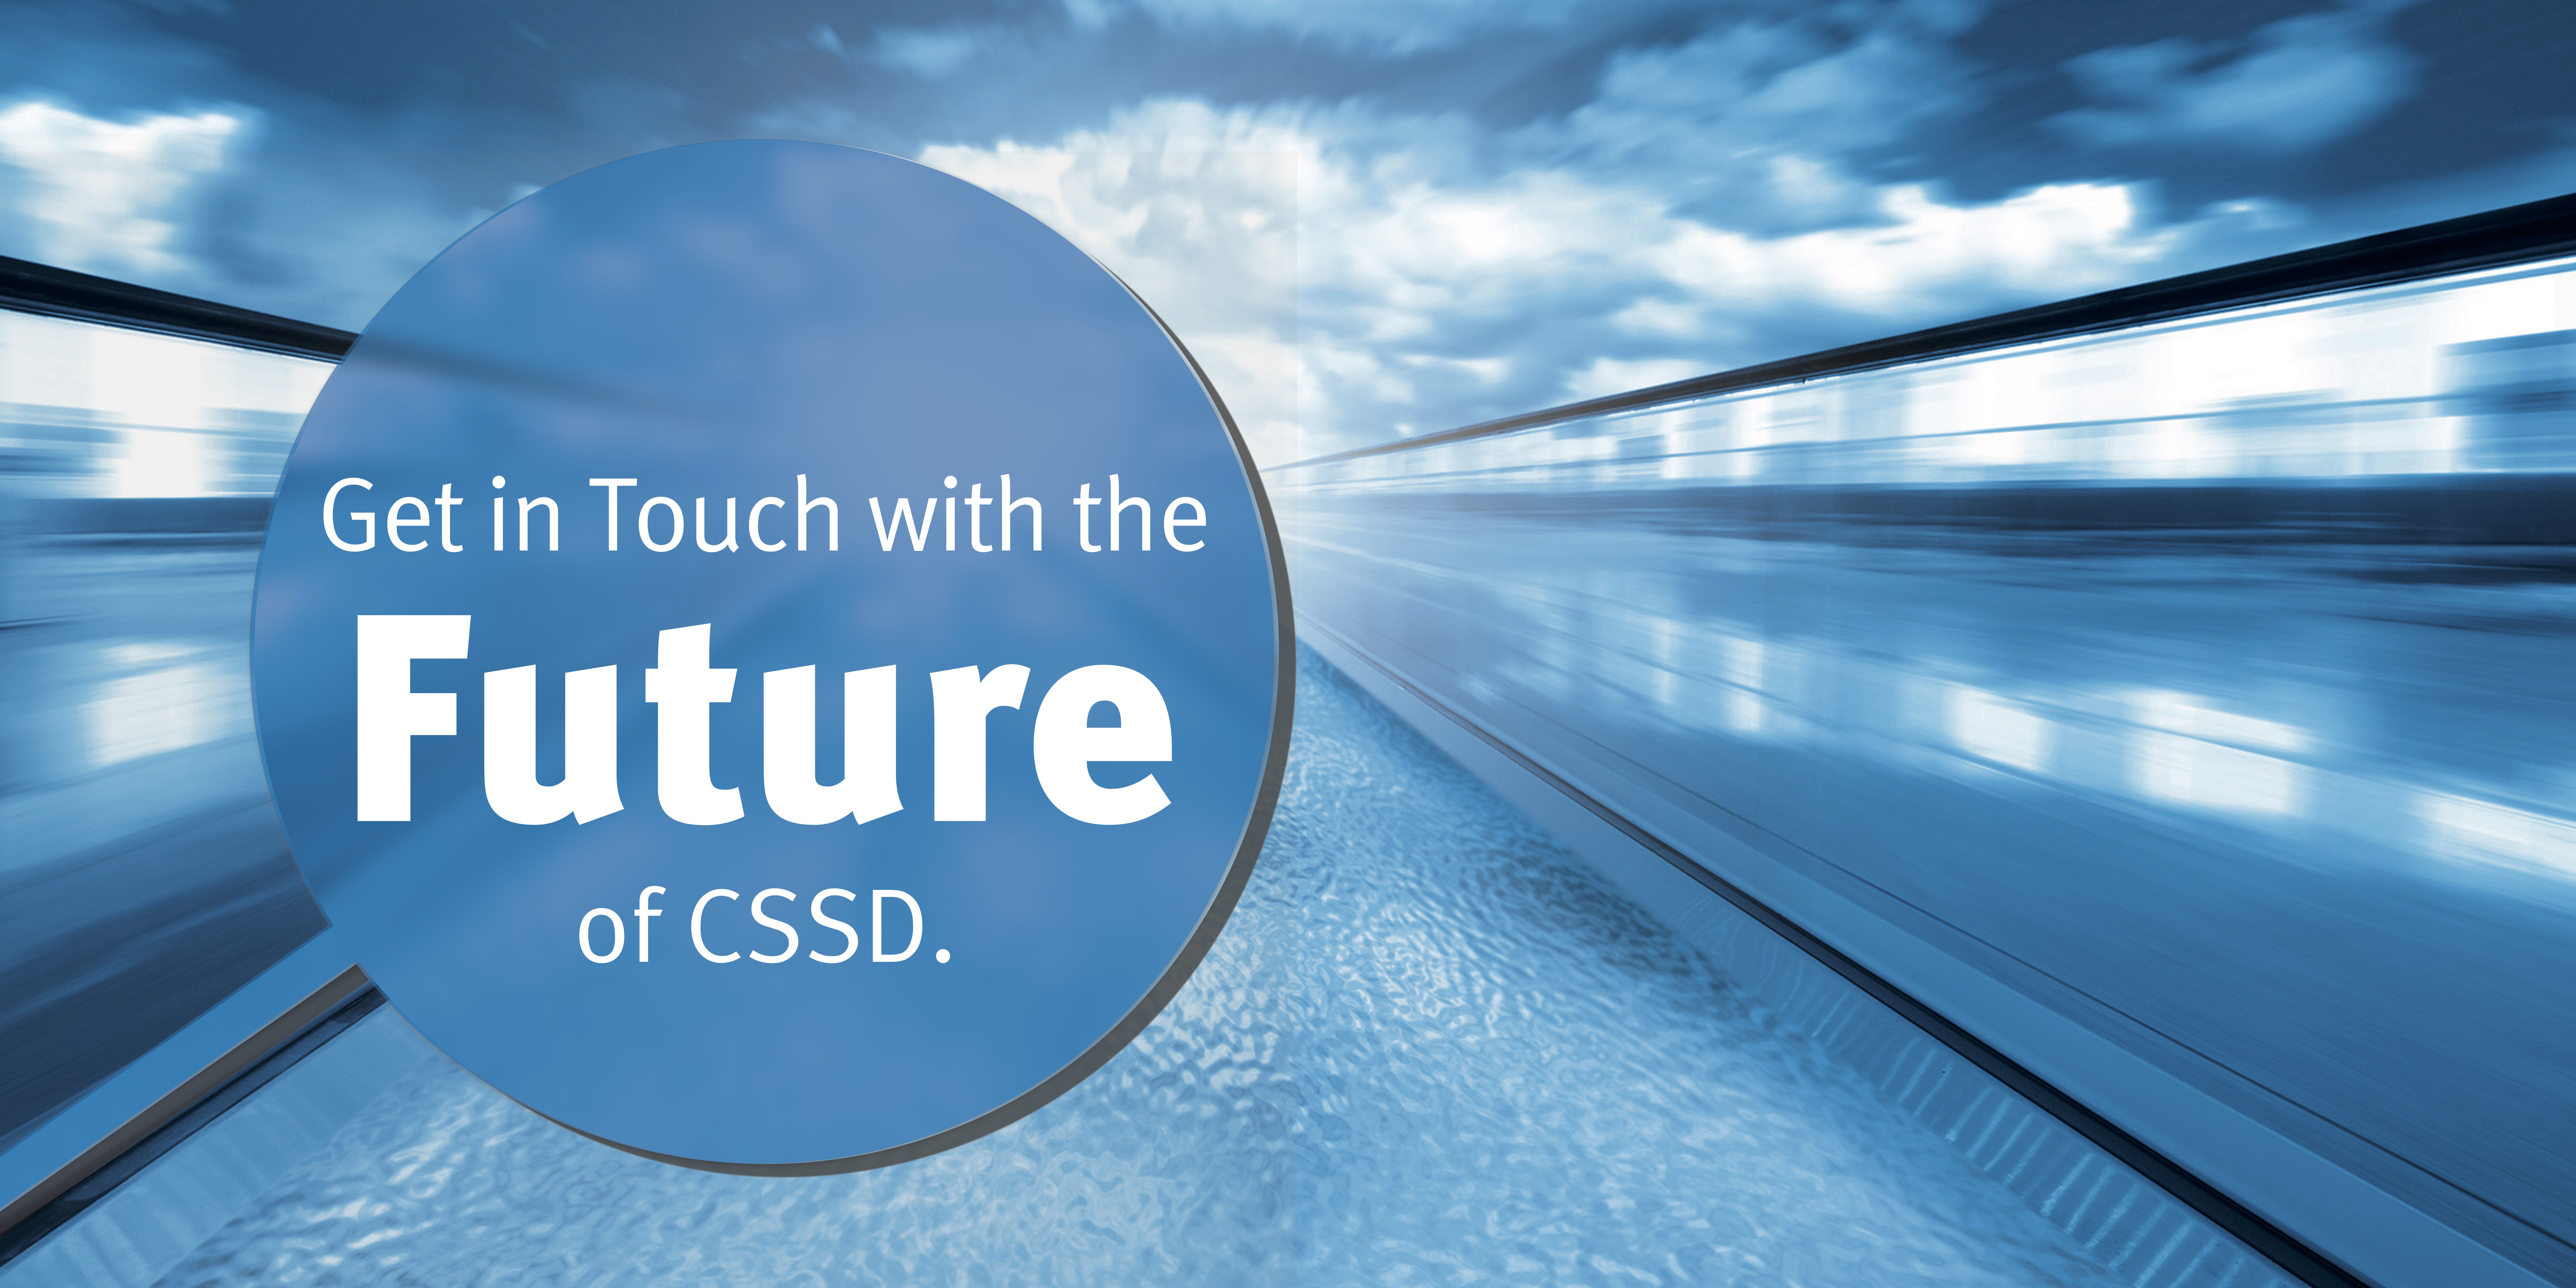 Get in touch with the future of CSSD